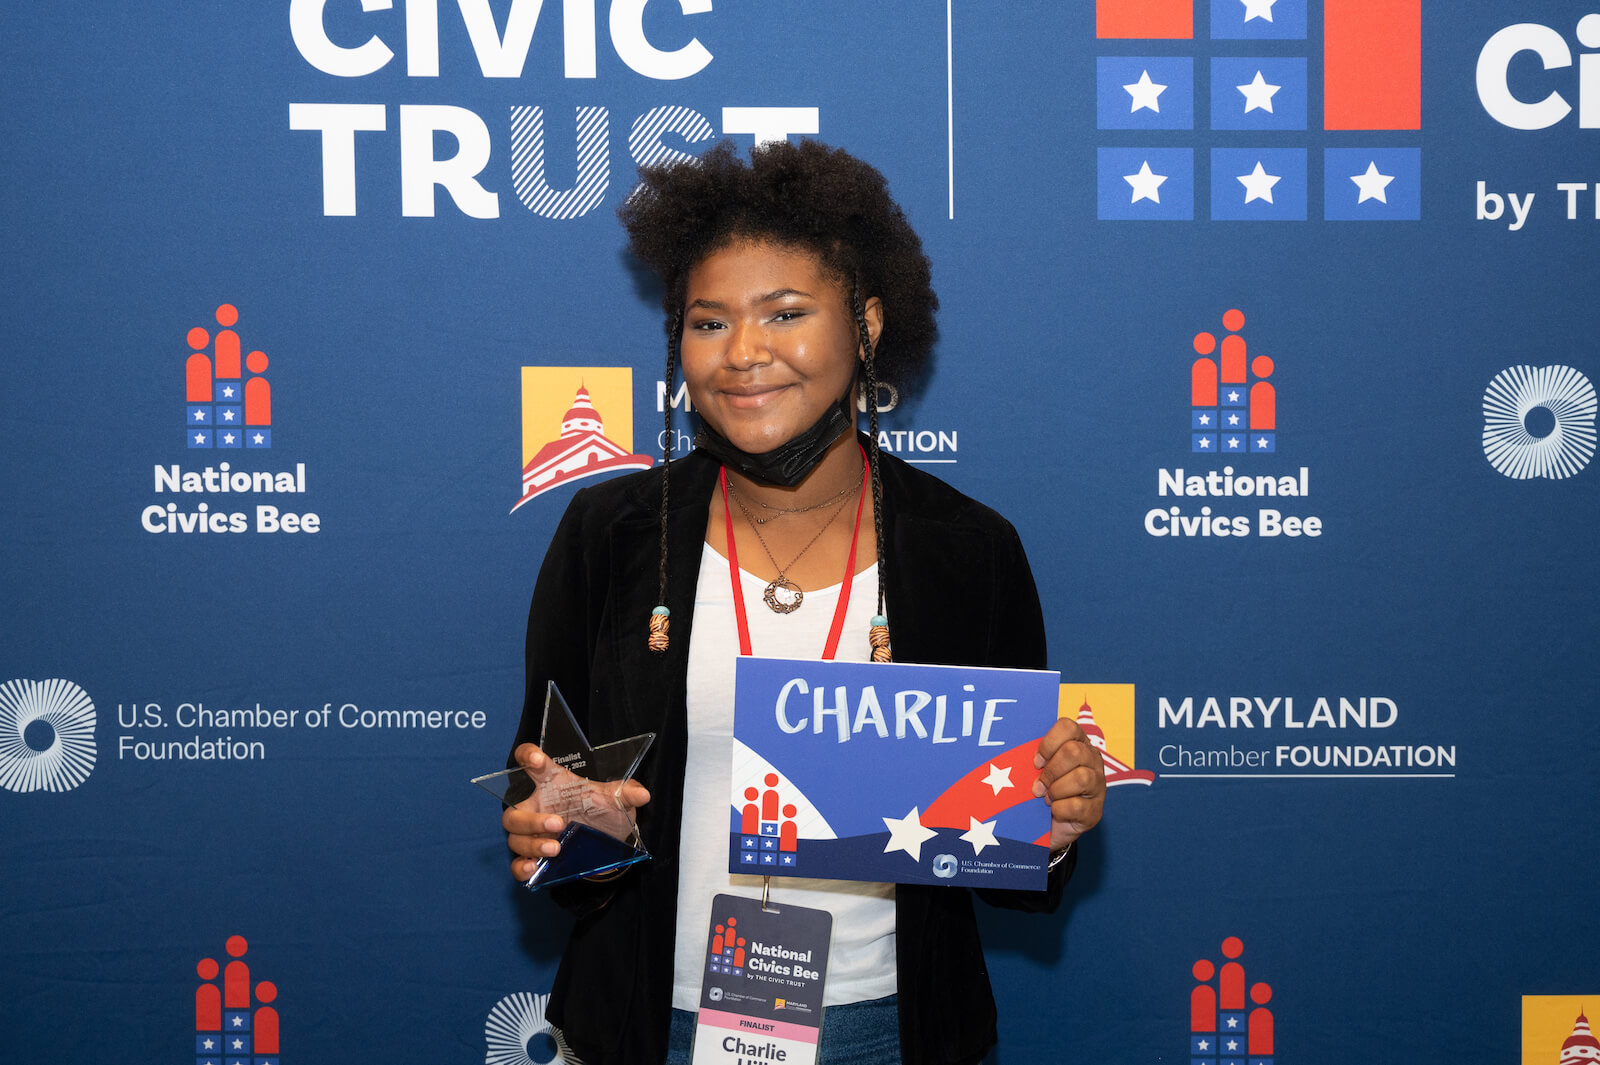 A close up of a middle school student who was a finalist in the 2023 National Civics Bee for Maryland standing in front of a backdrop with the National Civics Bee, U.S. Chamber Foundation, Civic Trust and Maryland Chamber Foundation logos and holding a sign with her name on it.